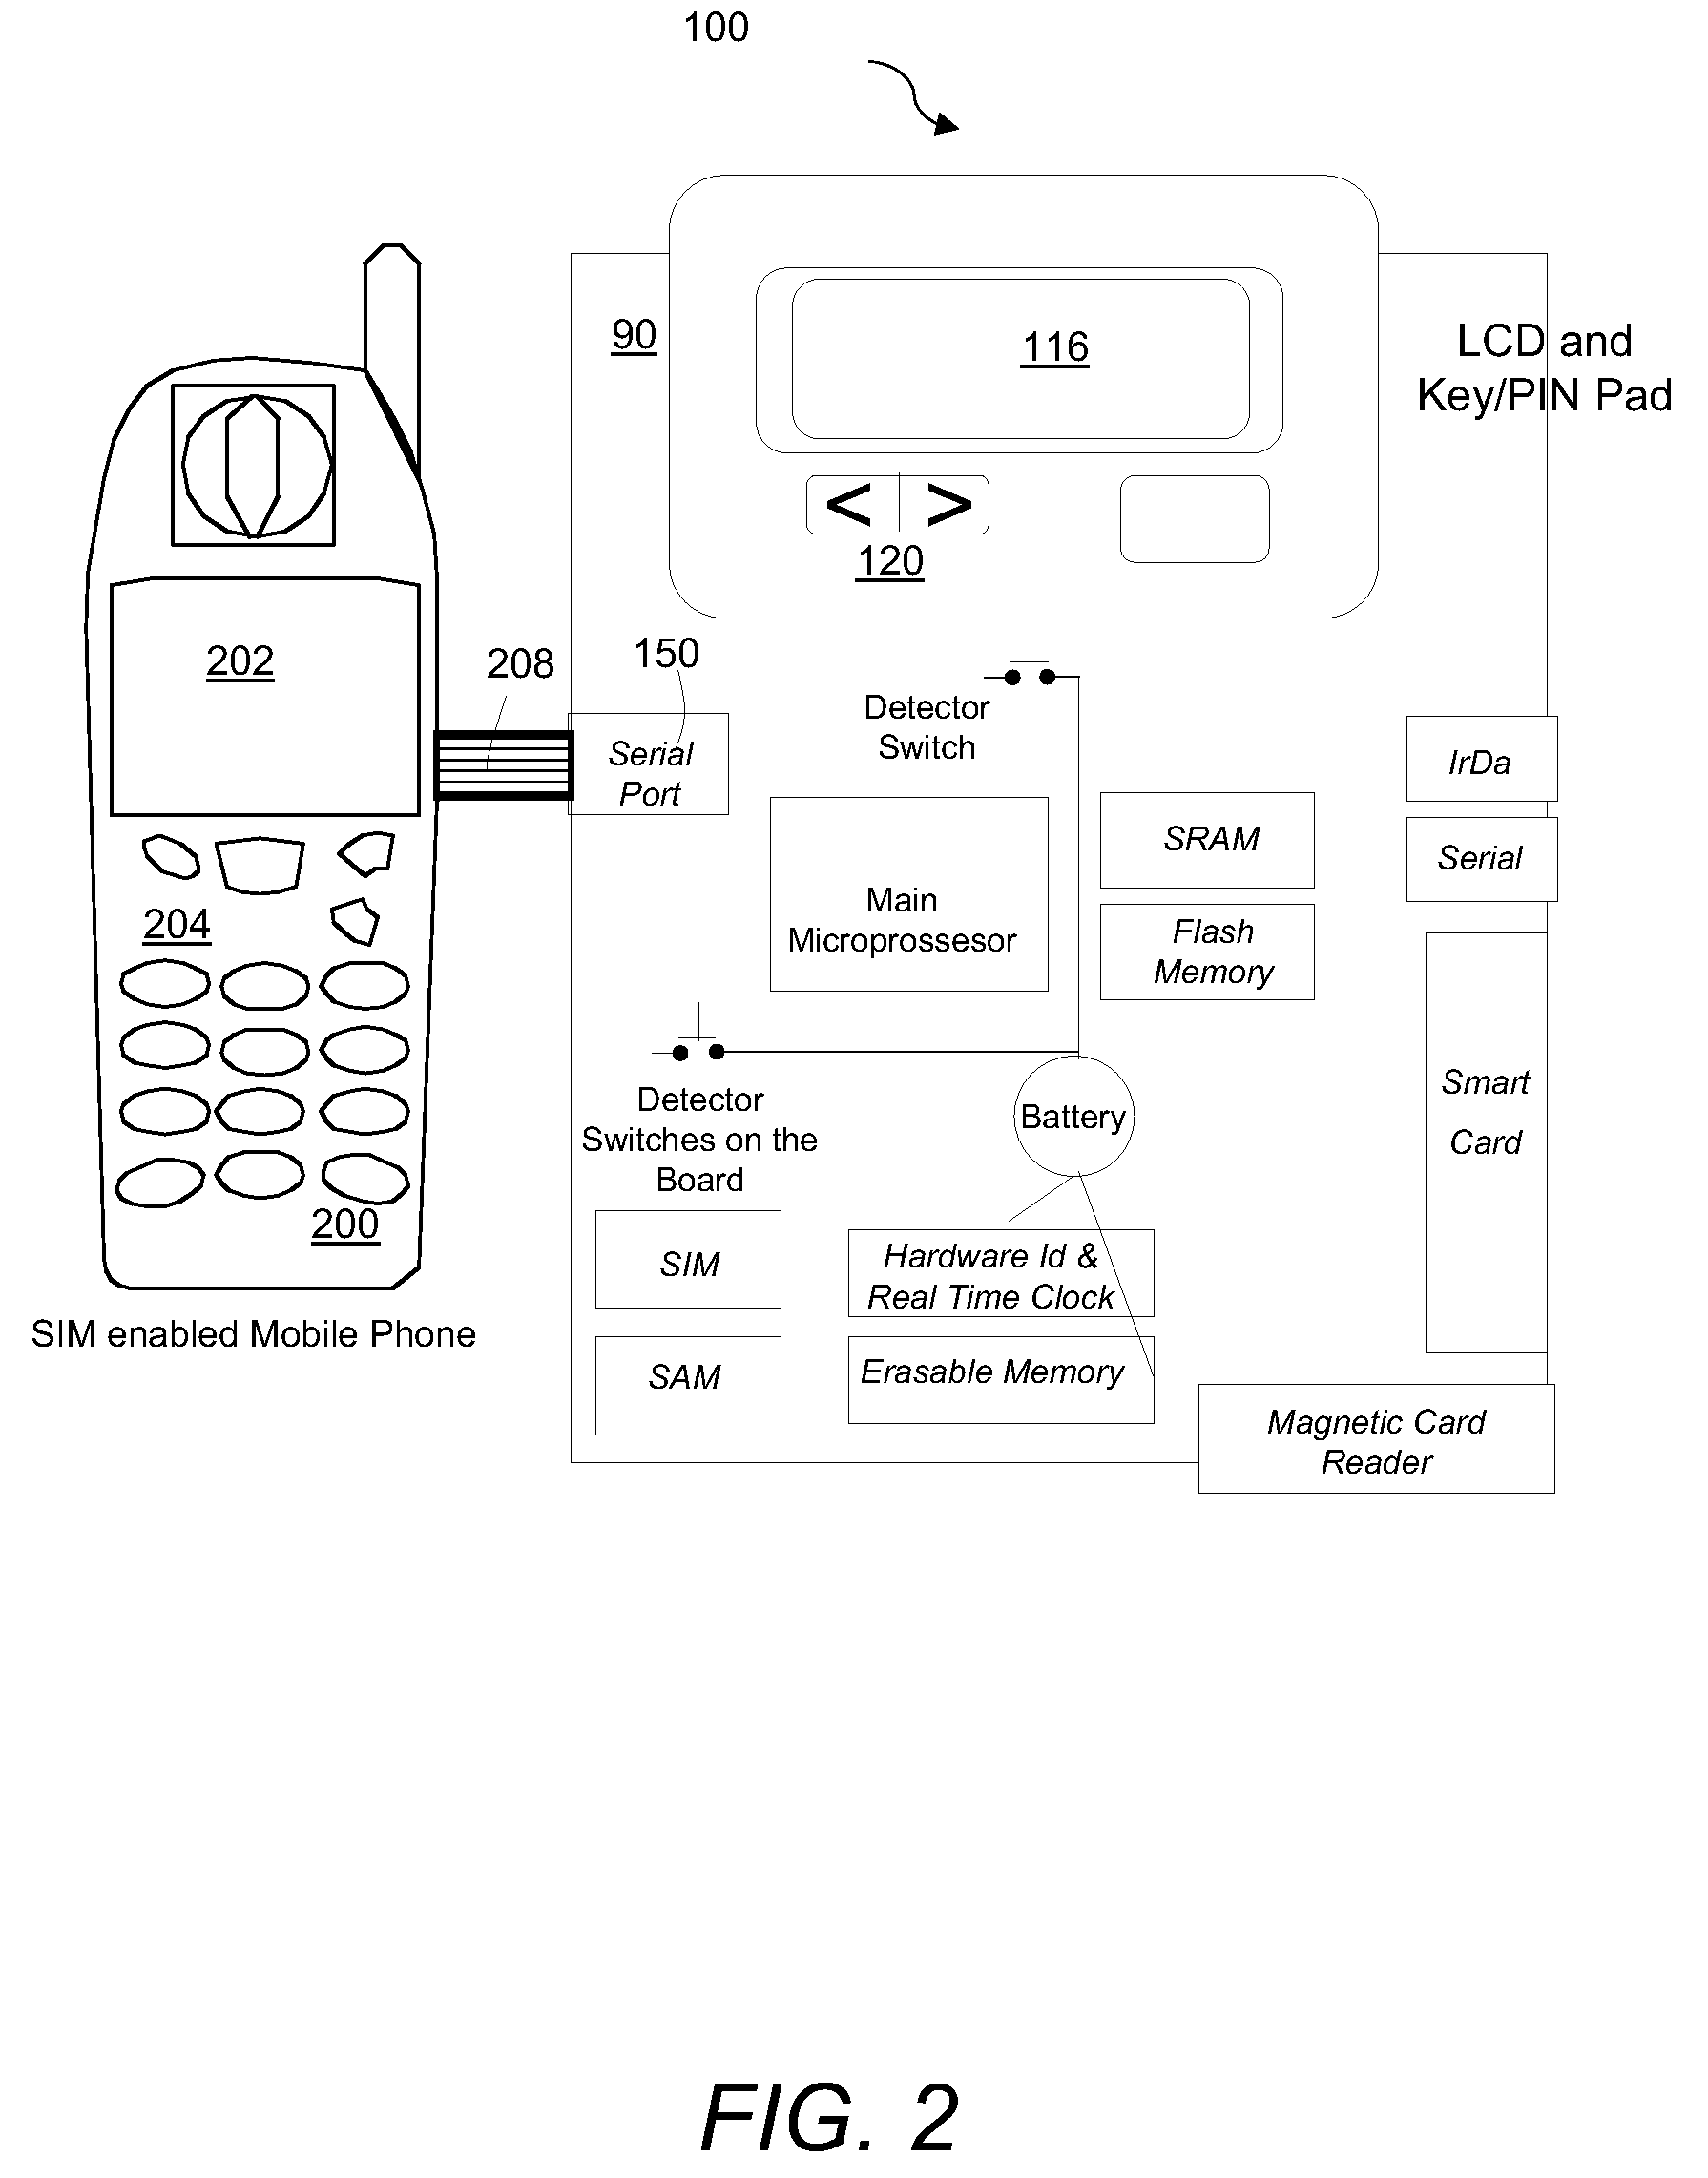 Secure PIN entry device for mobile phones